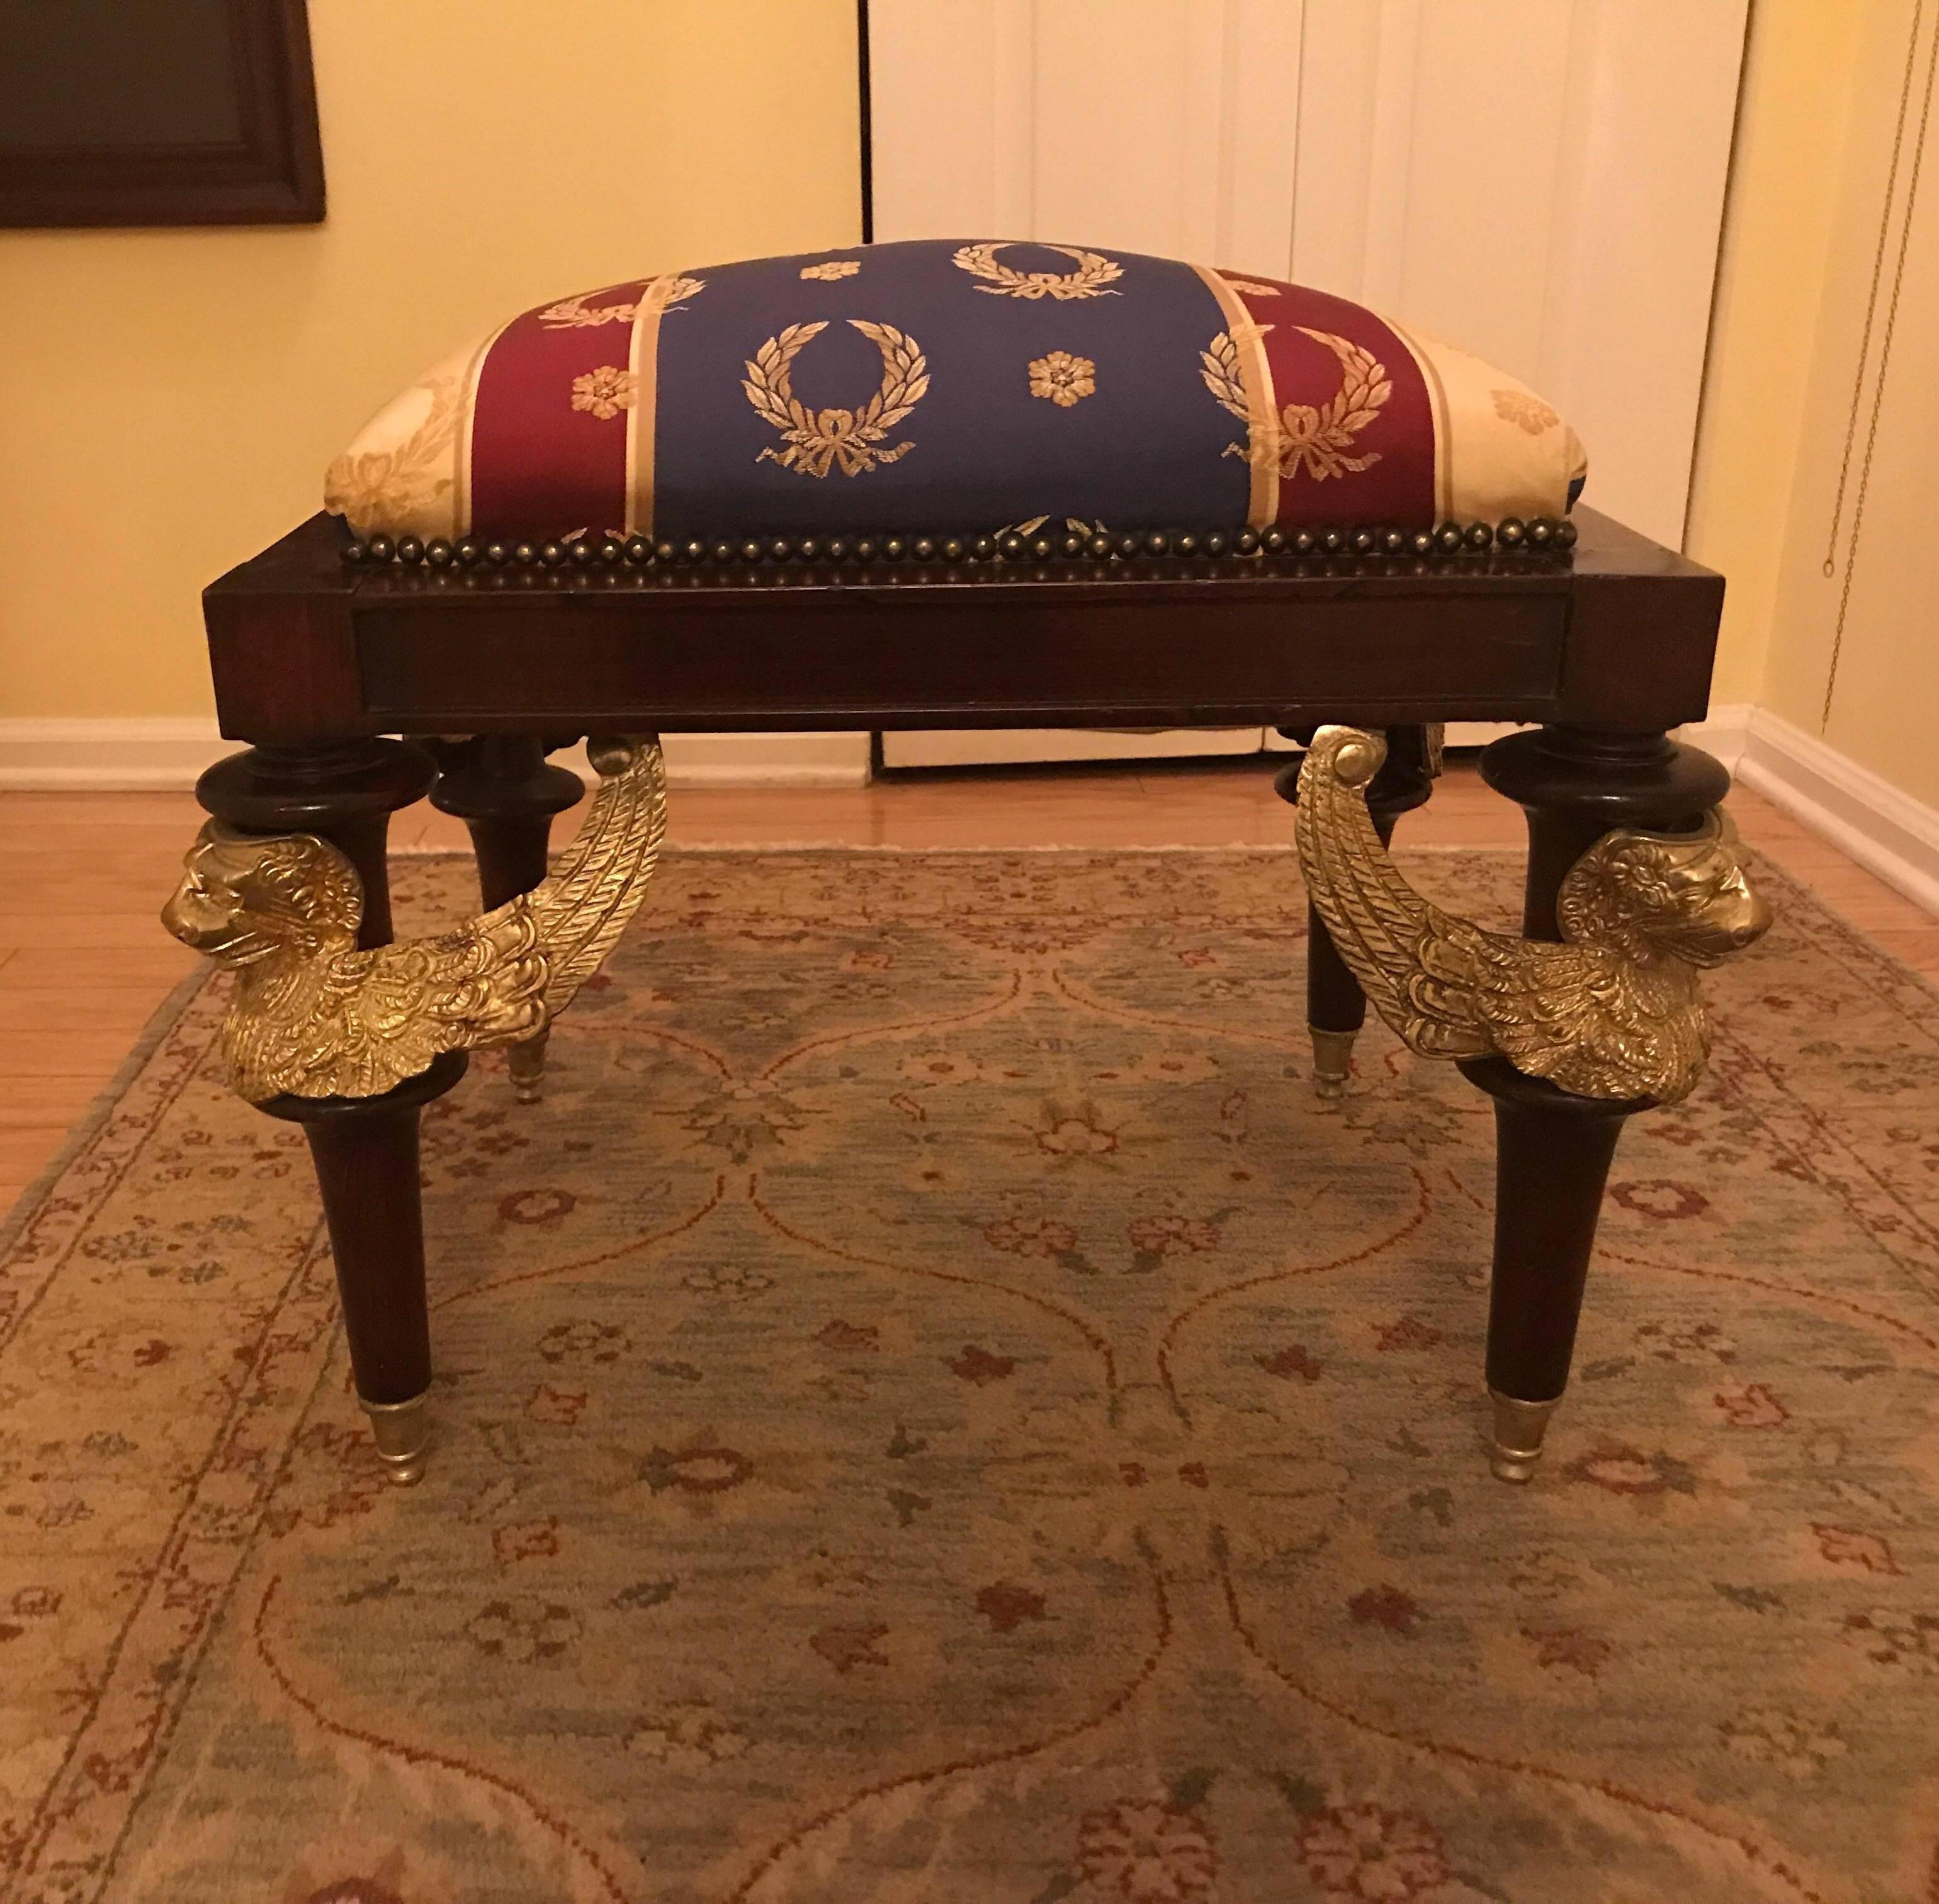 Opulent Egyptian revival gilt mounted bench. The rectangular bench with four trumpet legs with winged figurative Egyptian style mounts resting on four gilt capped feet. The fabric is jewel tone Napoleonic silk.